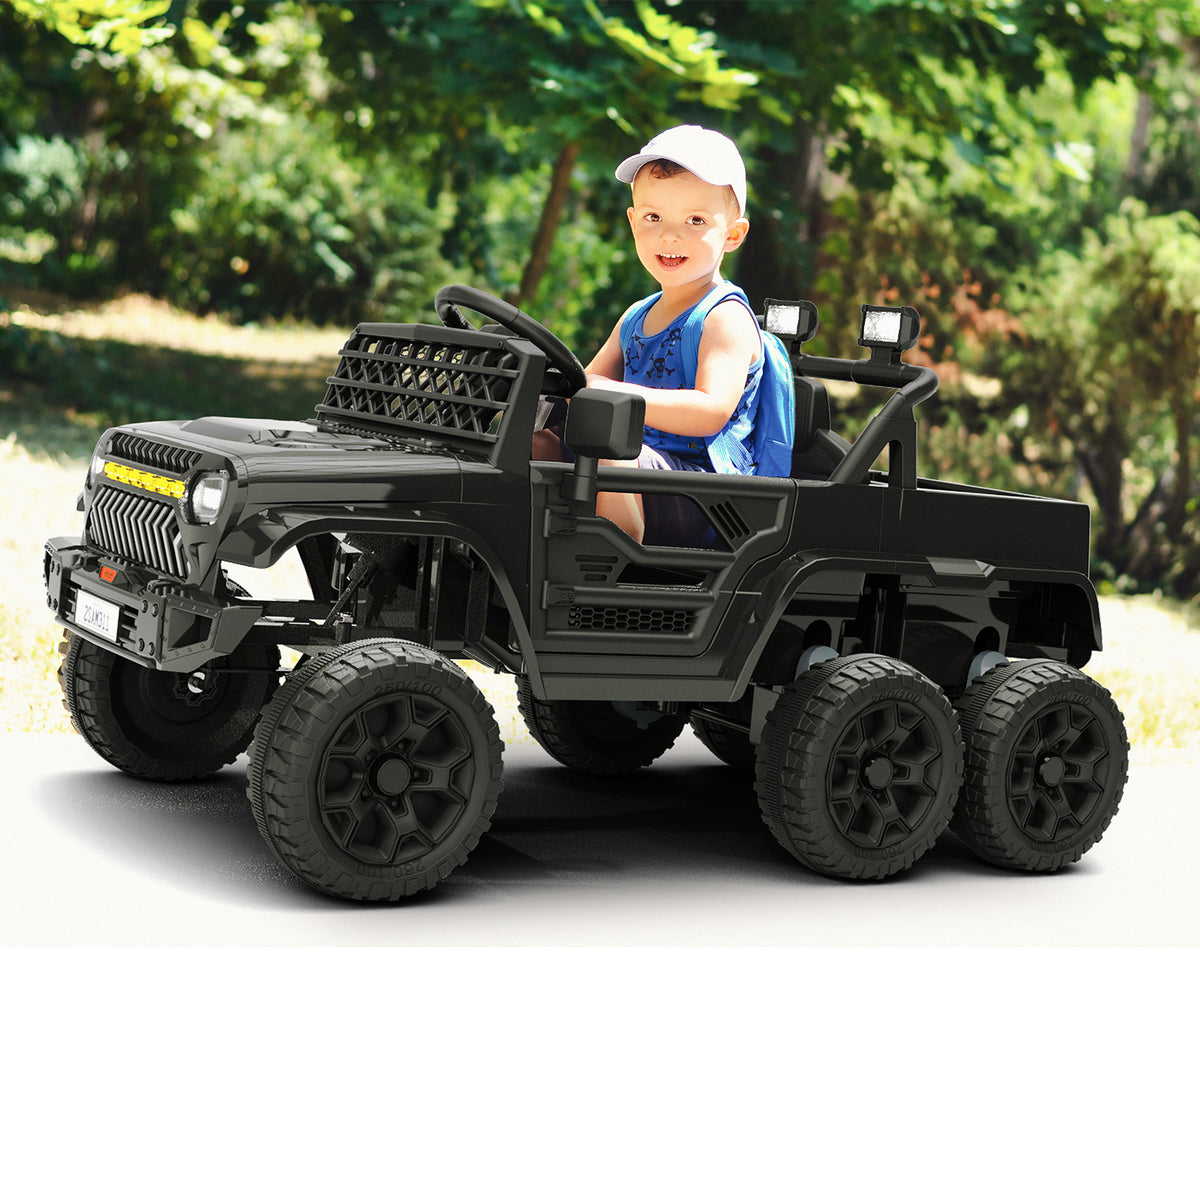 XJD 12V 7AH Ride On Truck Car with Remote Control, 6 Wheels, 2 Seats, Power Car for Kids, Black